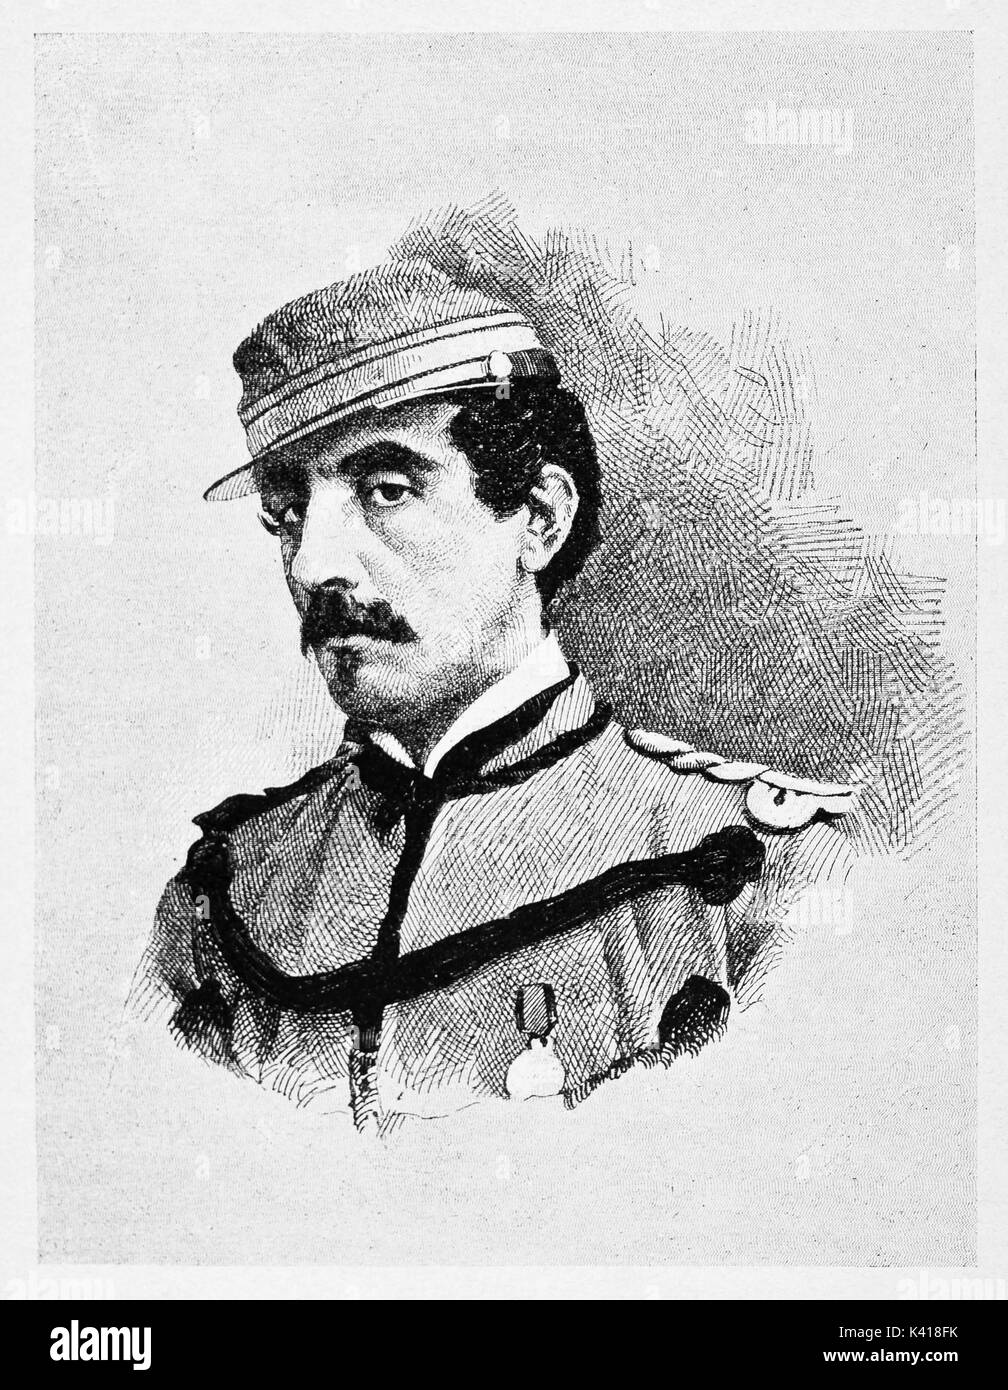 Ancient portrait of a general in his uniform, moustaches and militar hat. Giuseppe Missori (1829 - 1911). By E. Matania after photo of A. Pavia on Garibaldi e i Suoi Tempi Milan Italy 1884 Stock Photo